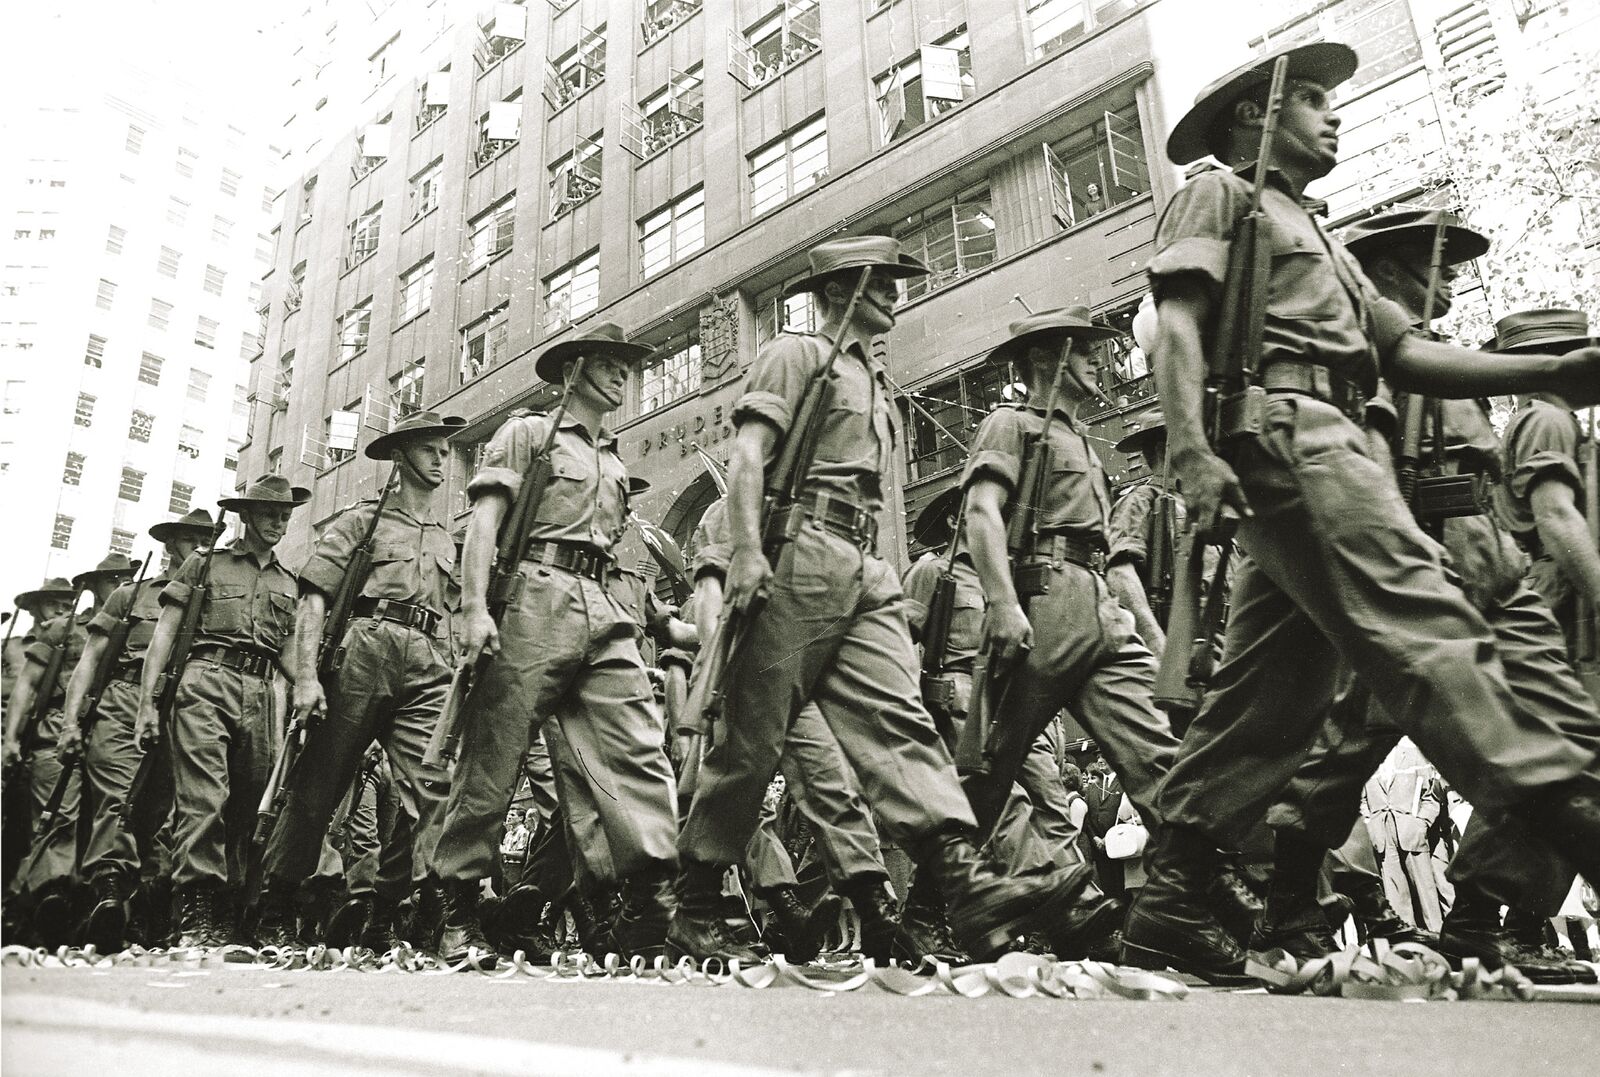 The Vietnam War became as divisive an issue in Australia as it was in the United States, sparking mass public protests. Unlike their American counterparts, however, returning Australian troops were publicly lauded. (Stuart MacGladrie/Fairfax Media via Getty Images)